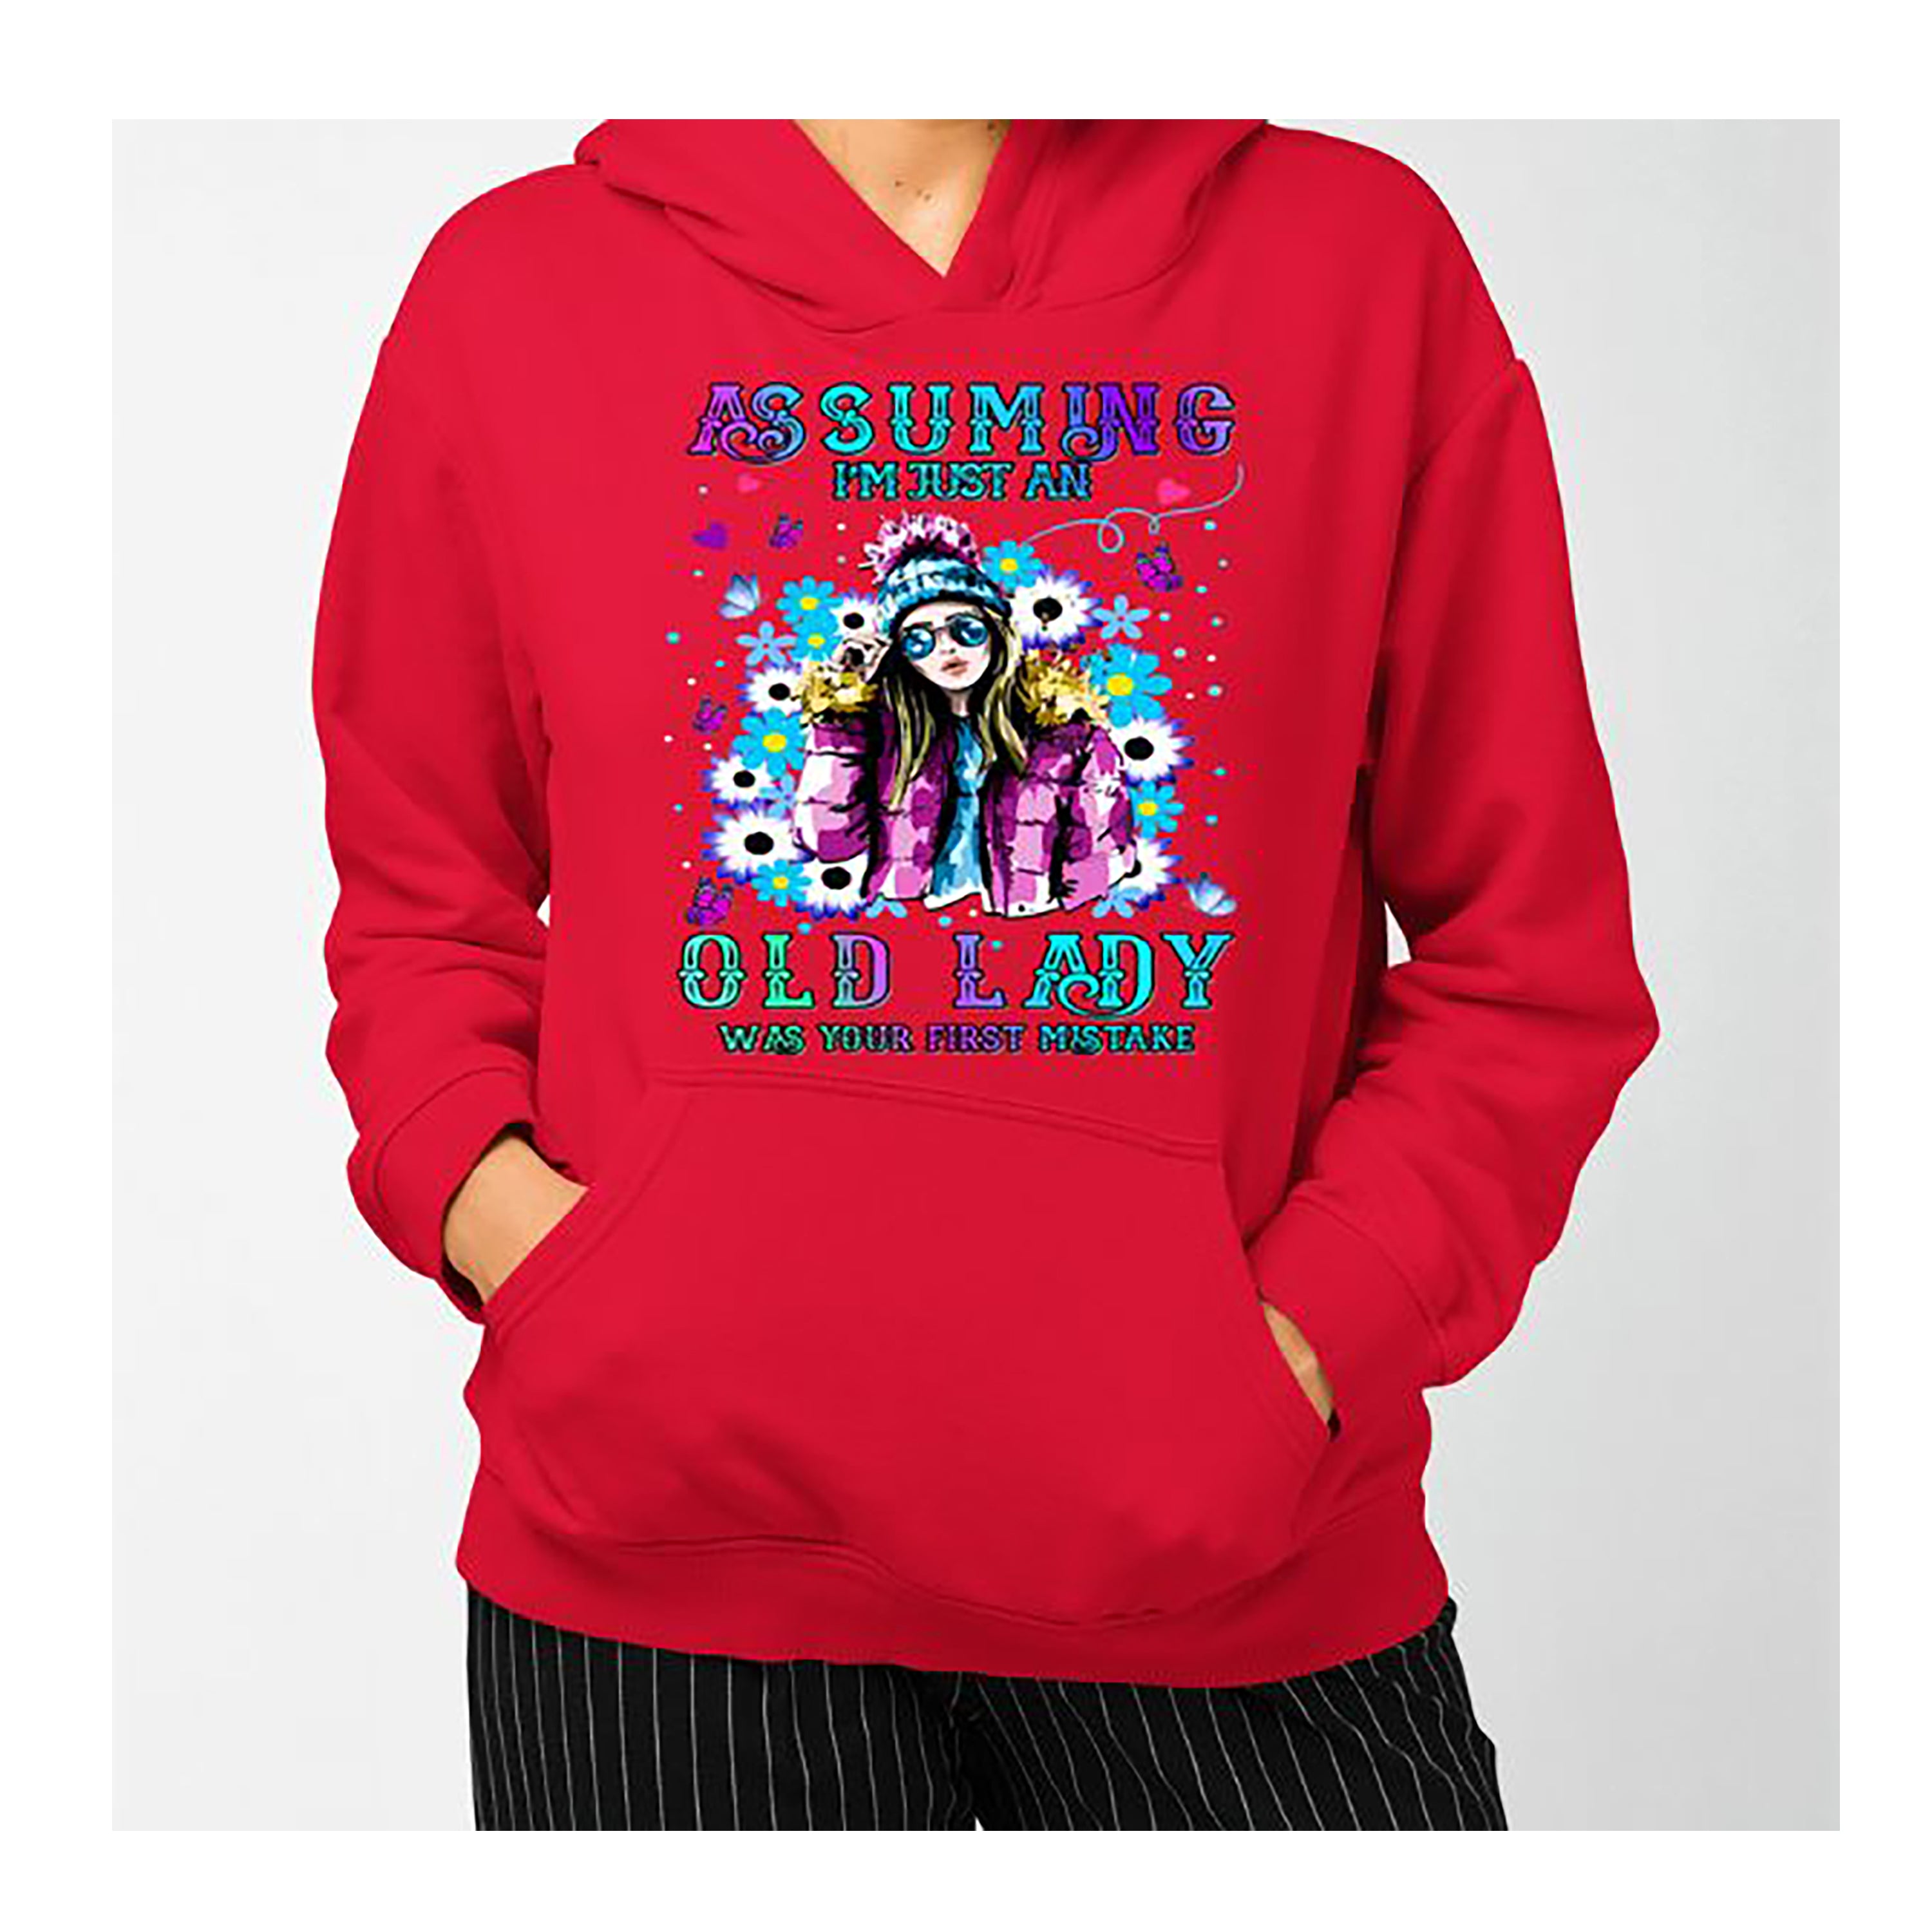 "Assuming I'm Just An Old Lady" Hoodie & Sweatshirt